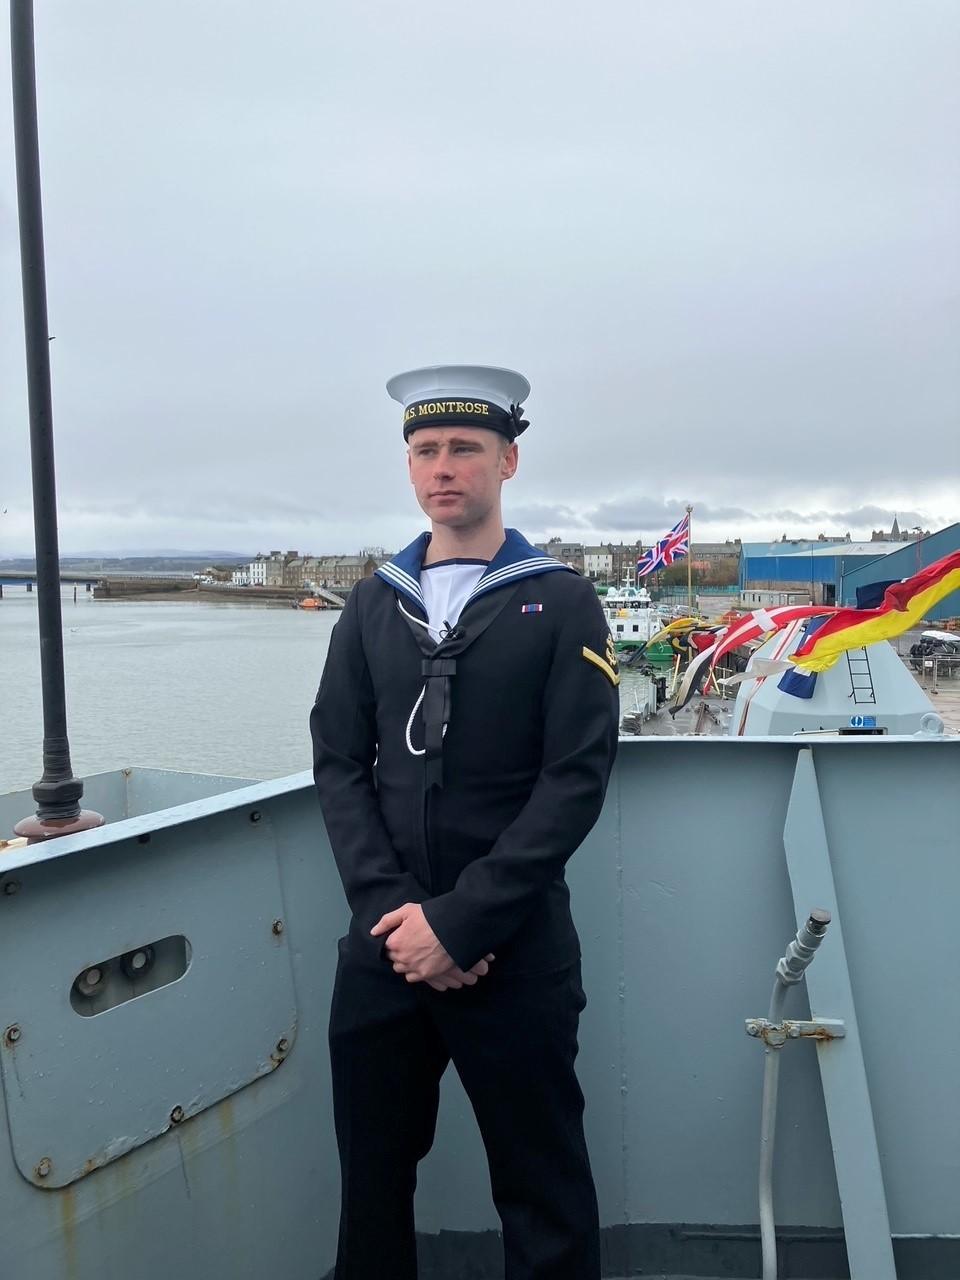 Leading Seaman Paul Linford who was proud to sail home with HMS Montrose.